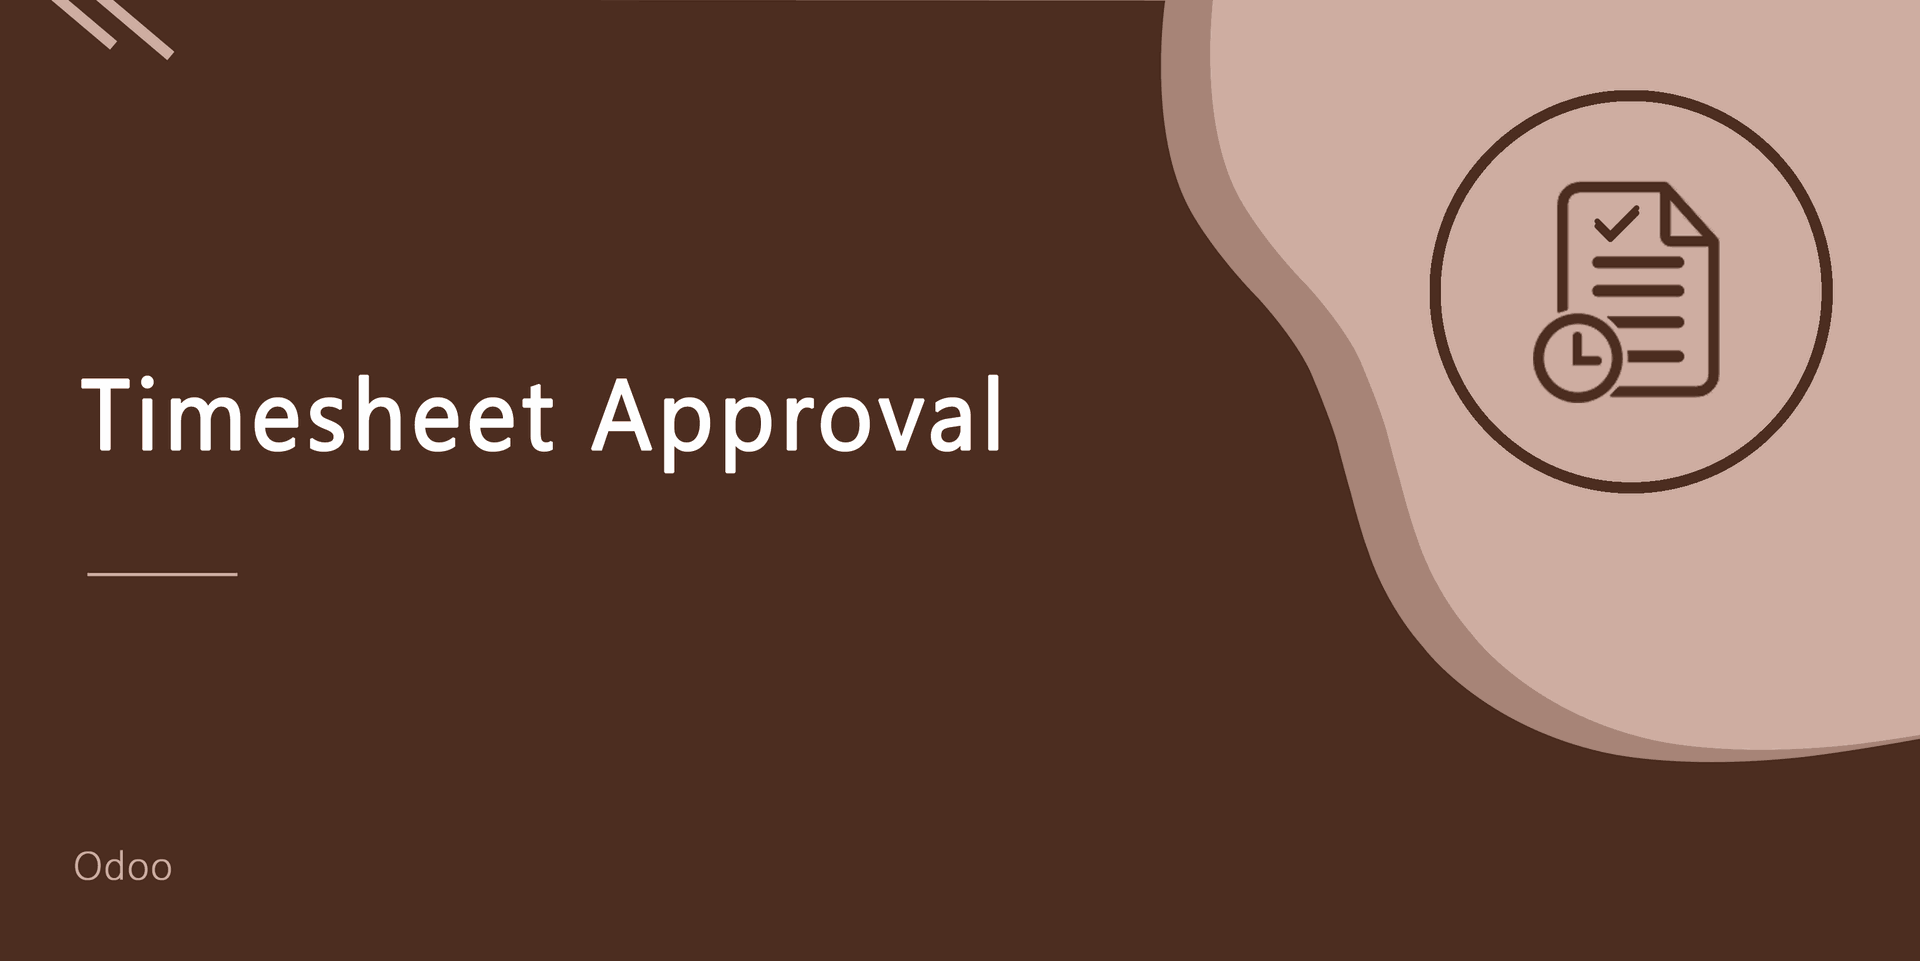 Timesheet Approval